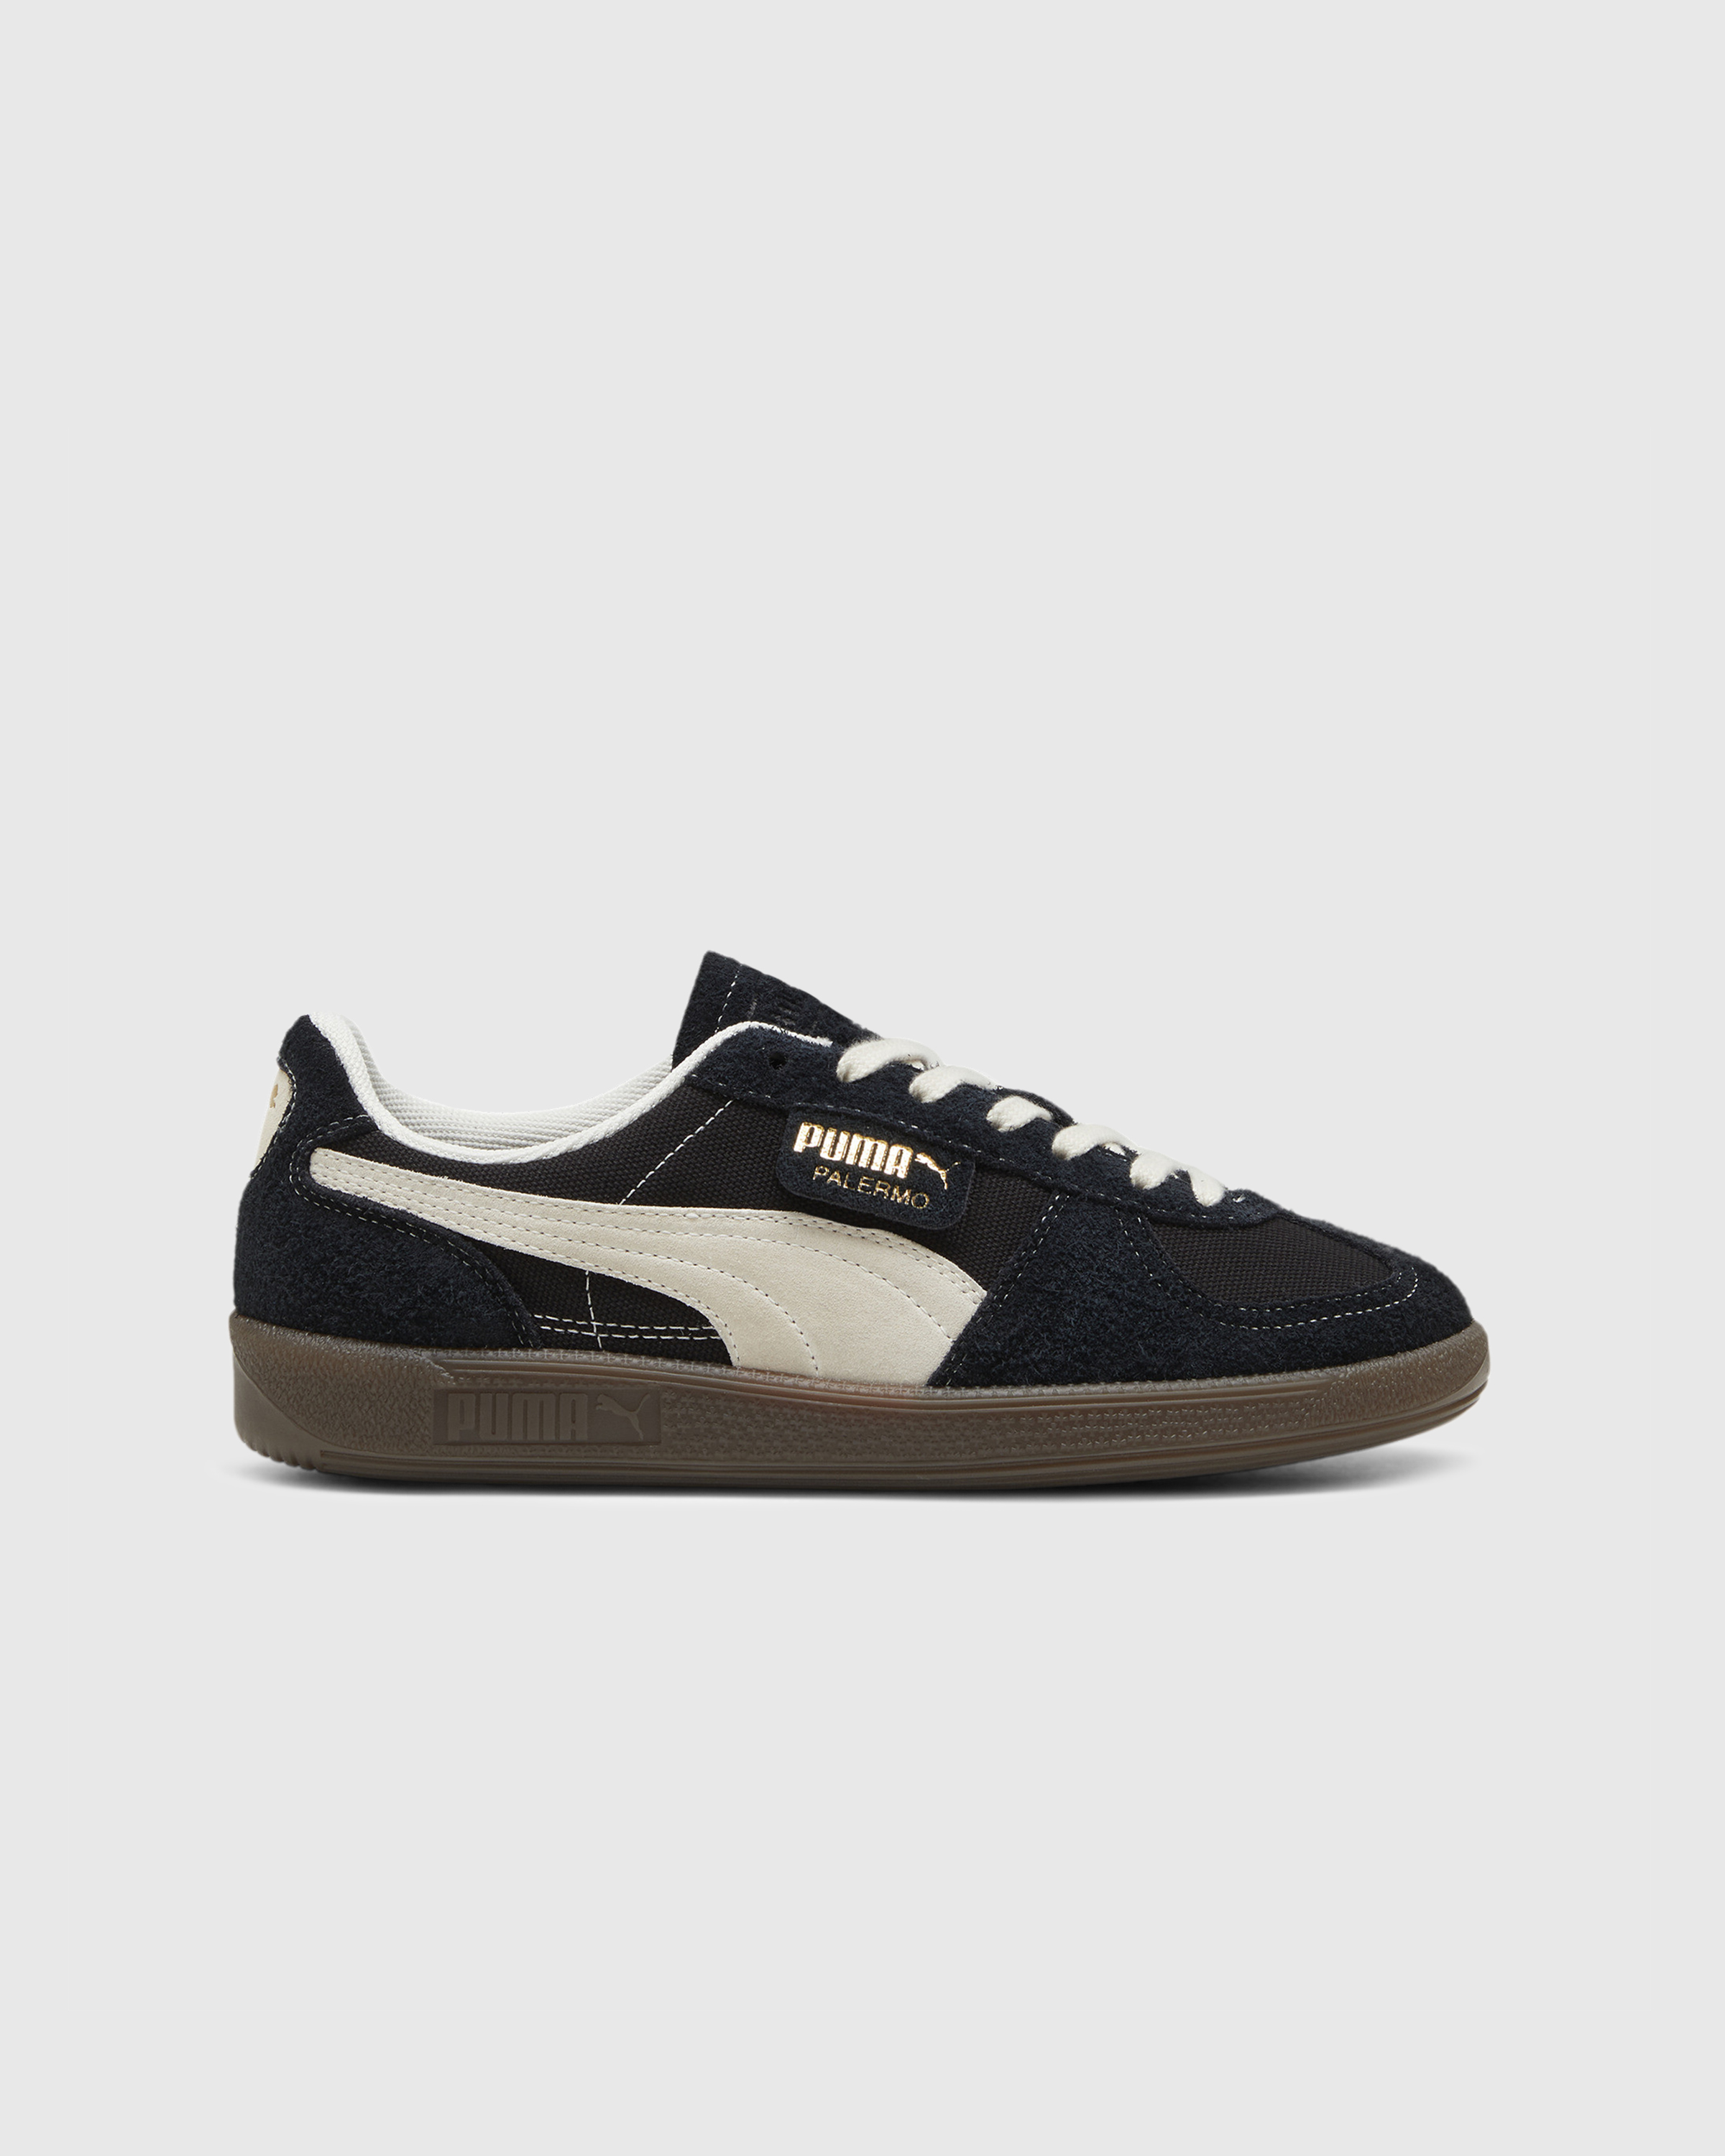 Puma – Palermo Vintage Black/Frosted Ivory/Gum - Low Top Sneakers - Black - Image 1